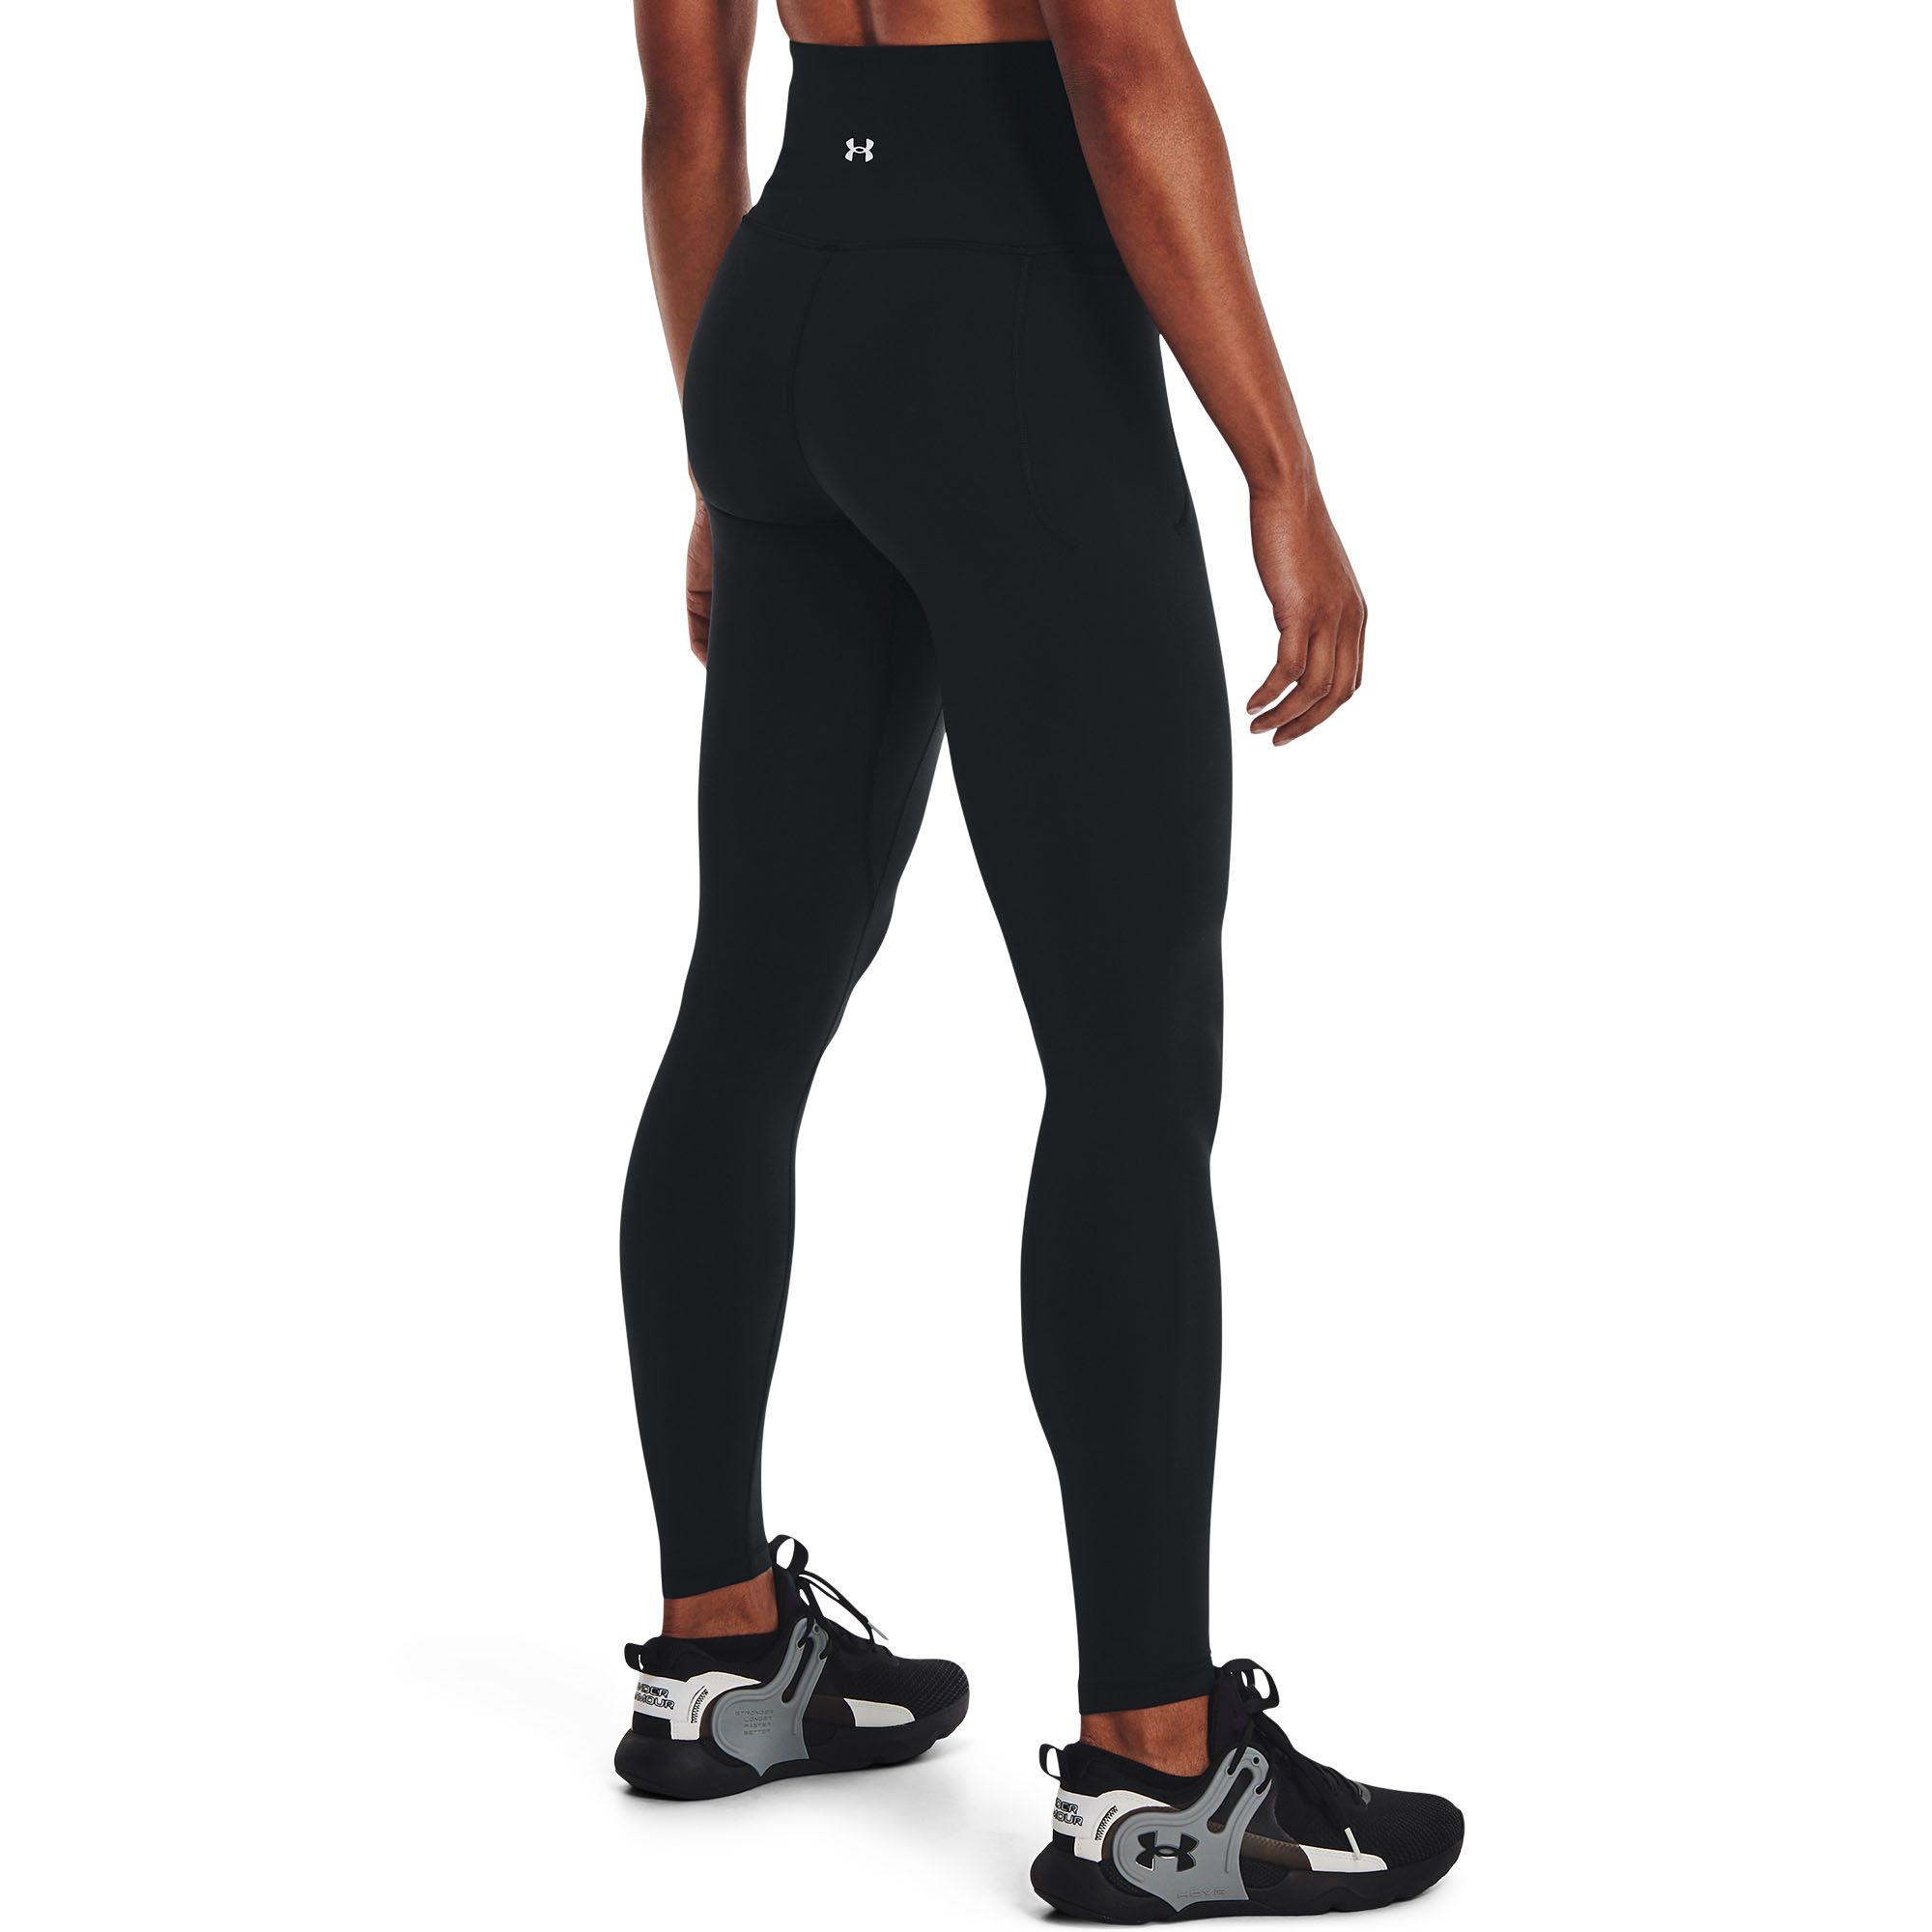 Under Armour, Pants & Jumpsuits, Under Armor M Black Fold Over Waistband  Workout Pants